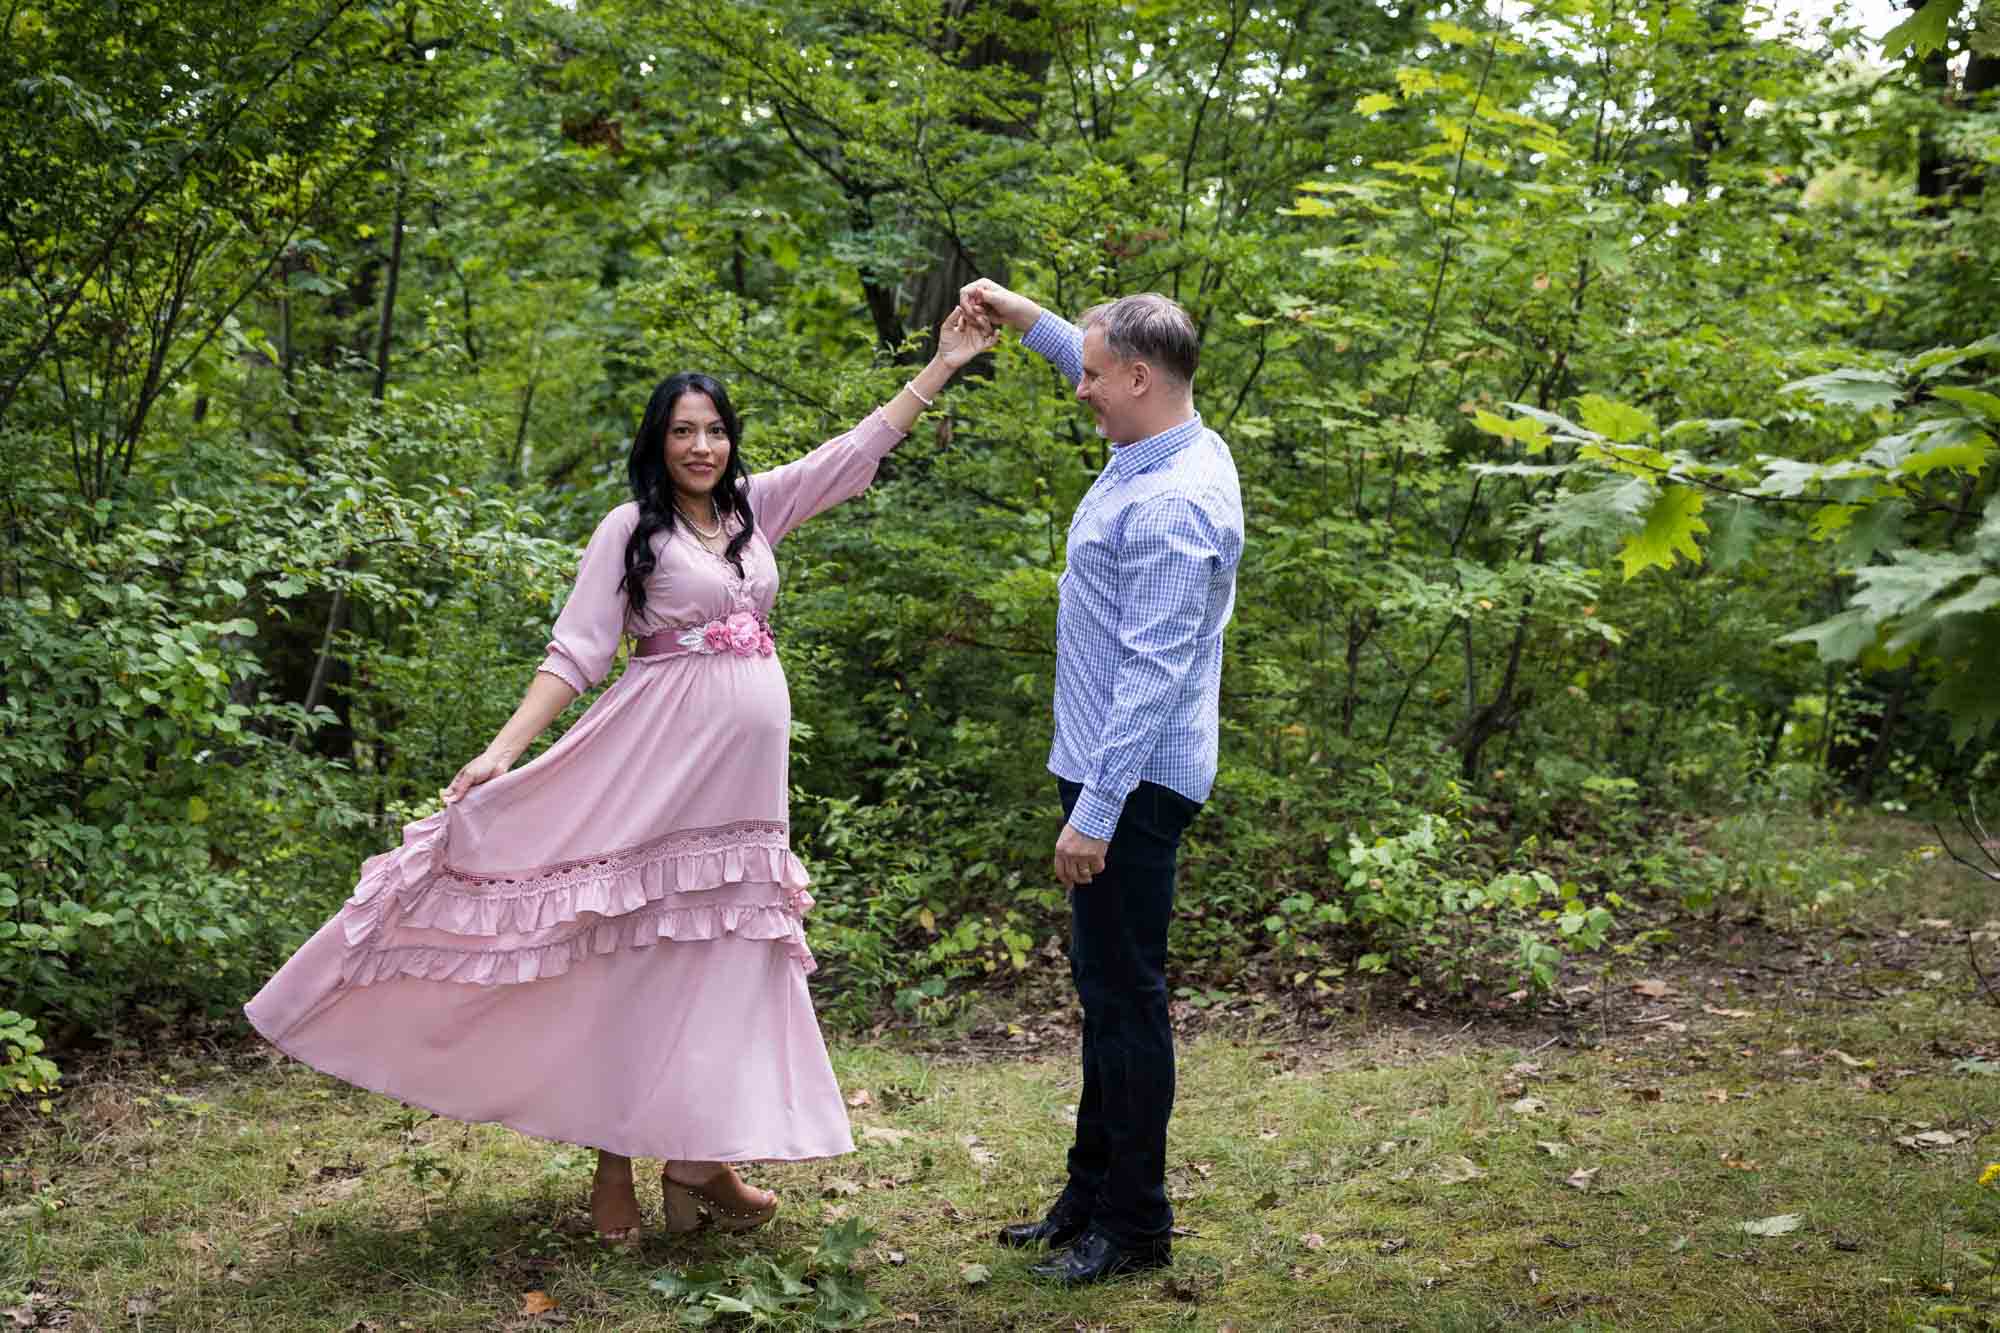 Pregnant woman wearing pink dress dancing with husband in Forest Park